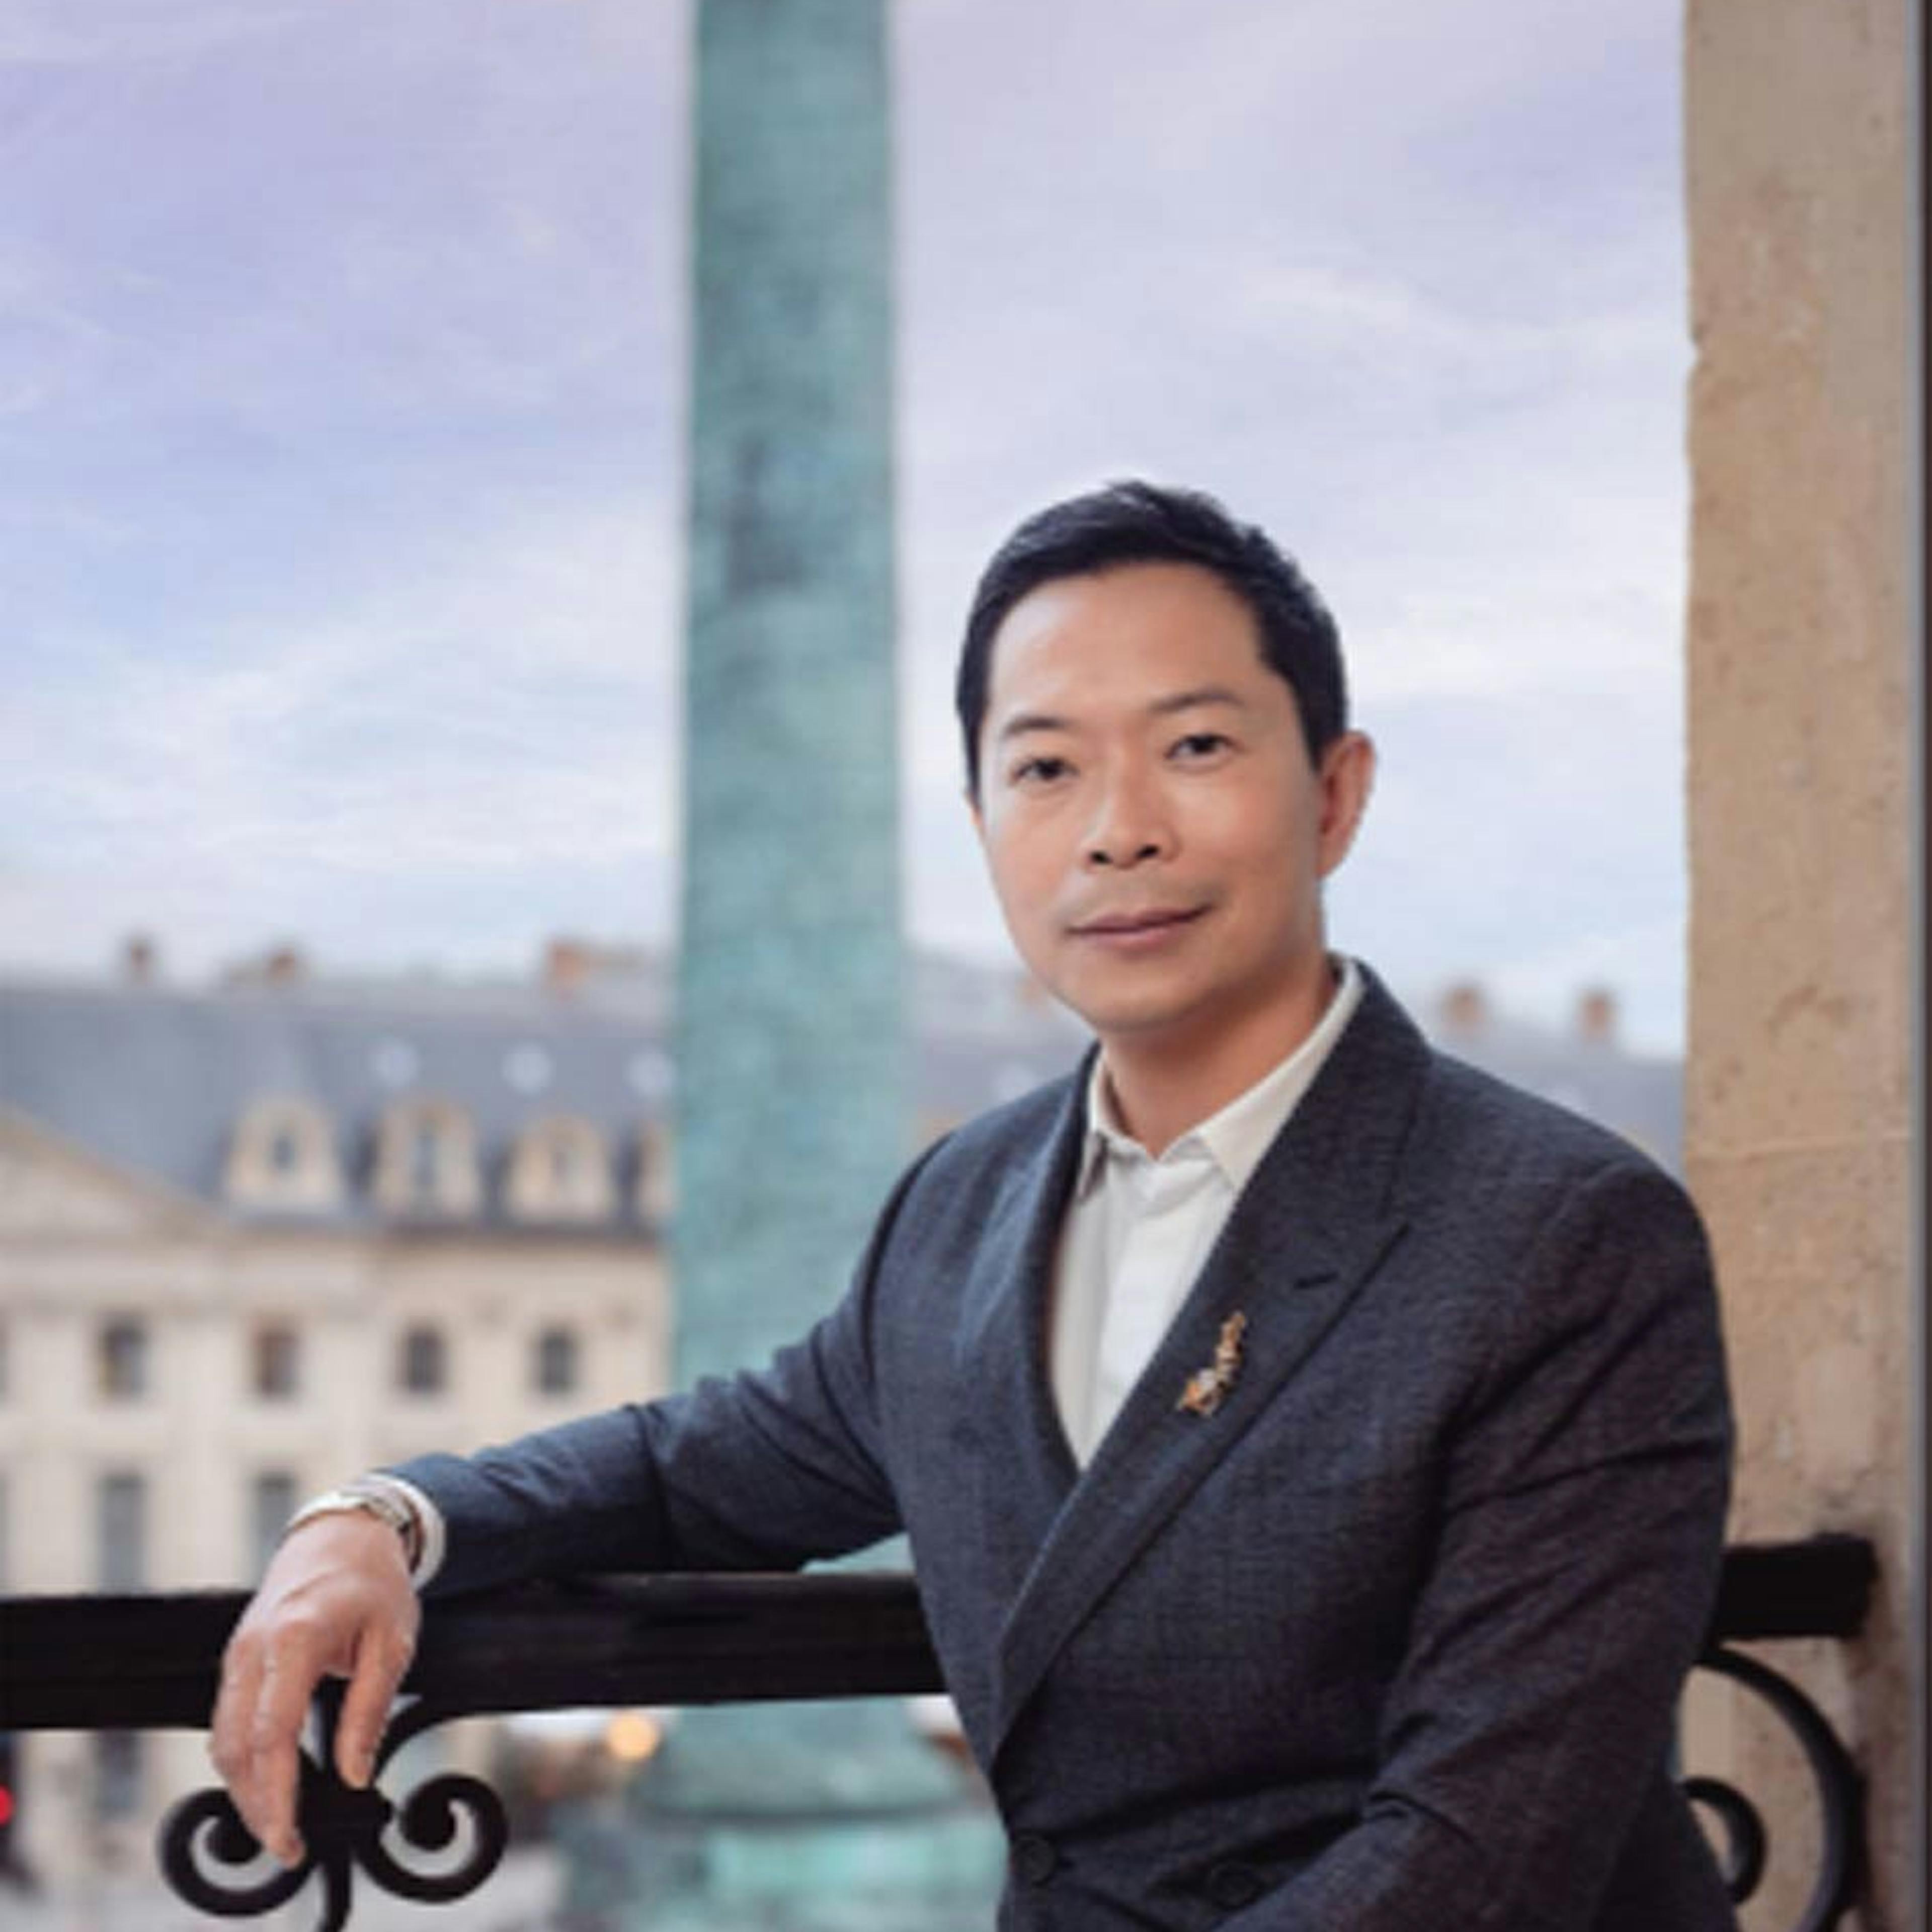 Charles Leung, Chief Executive Officer of Chaumet © Jean-Luc Perreard	